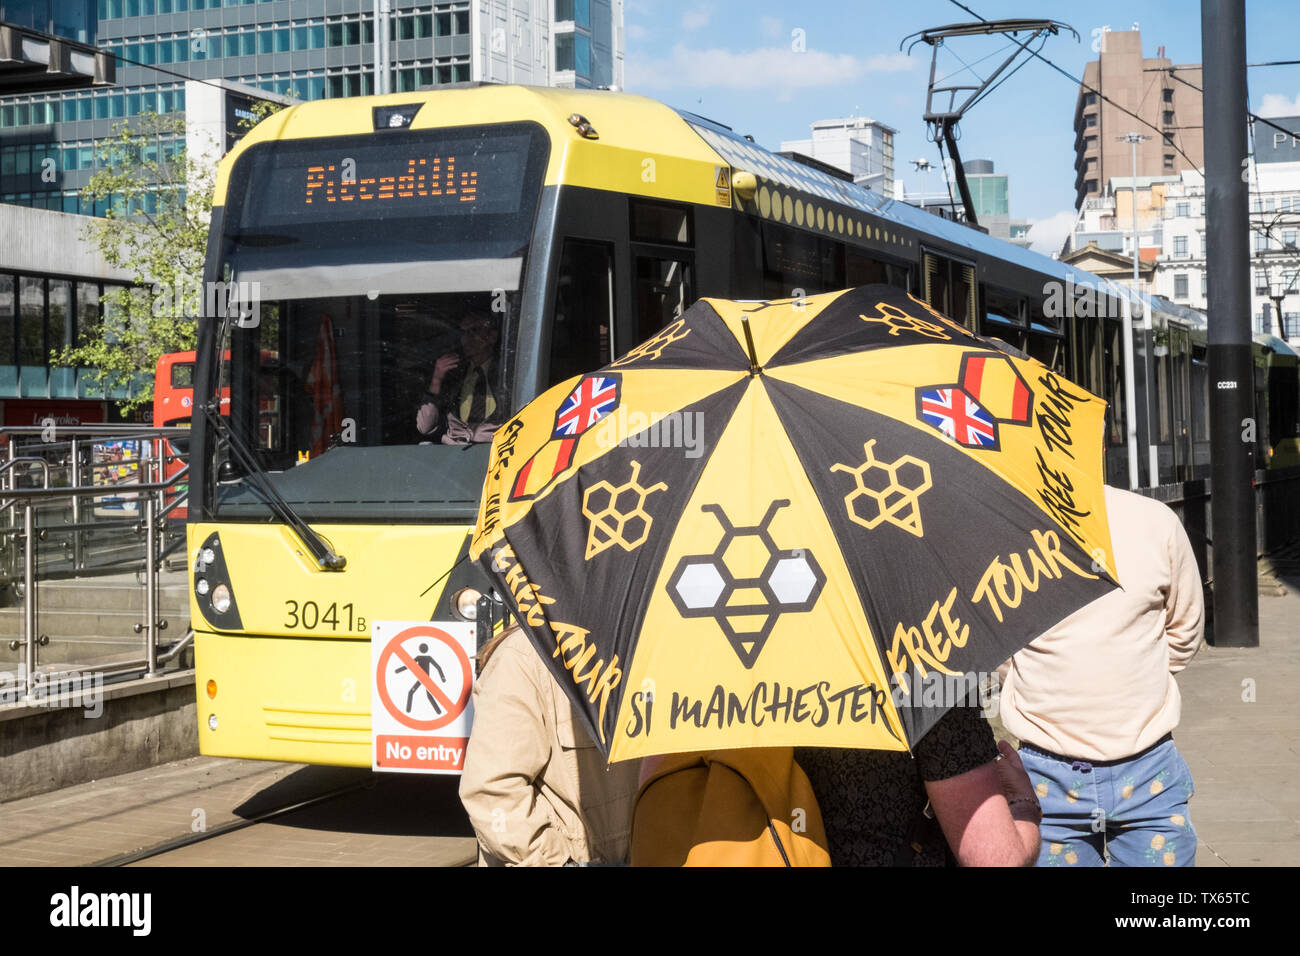 Free,donation,only,guided,tour,bee,symbol,umbrella,Metrolink,Manchester,north,northern,north west,city,England,English,GB,UK,Britain,British,Europe, Stock Photo